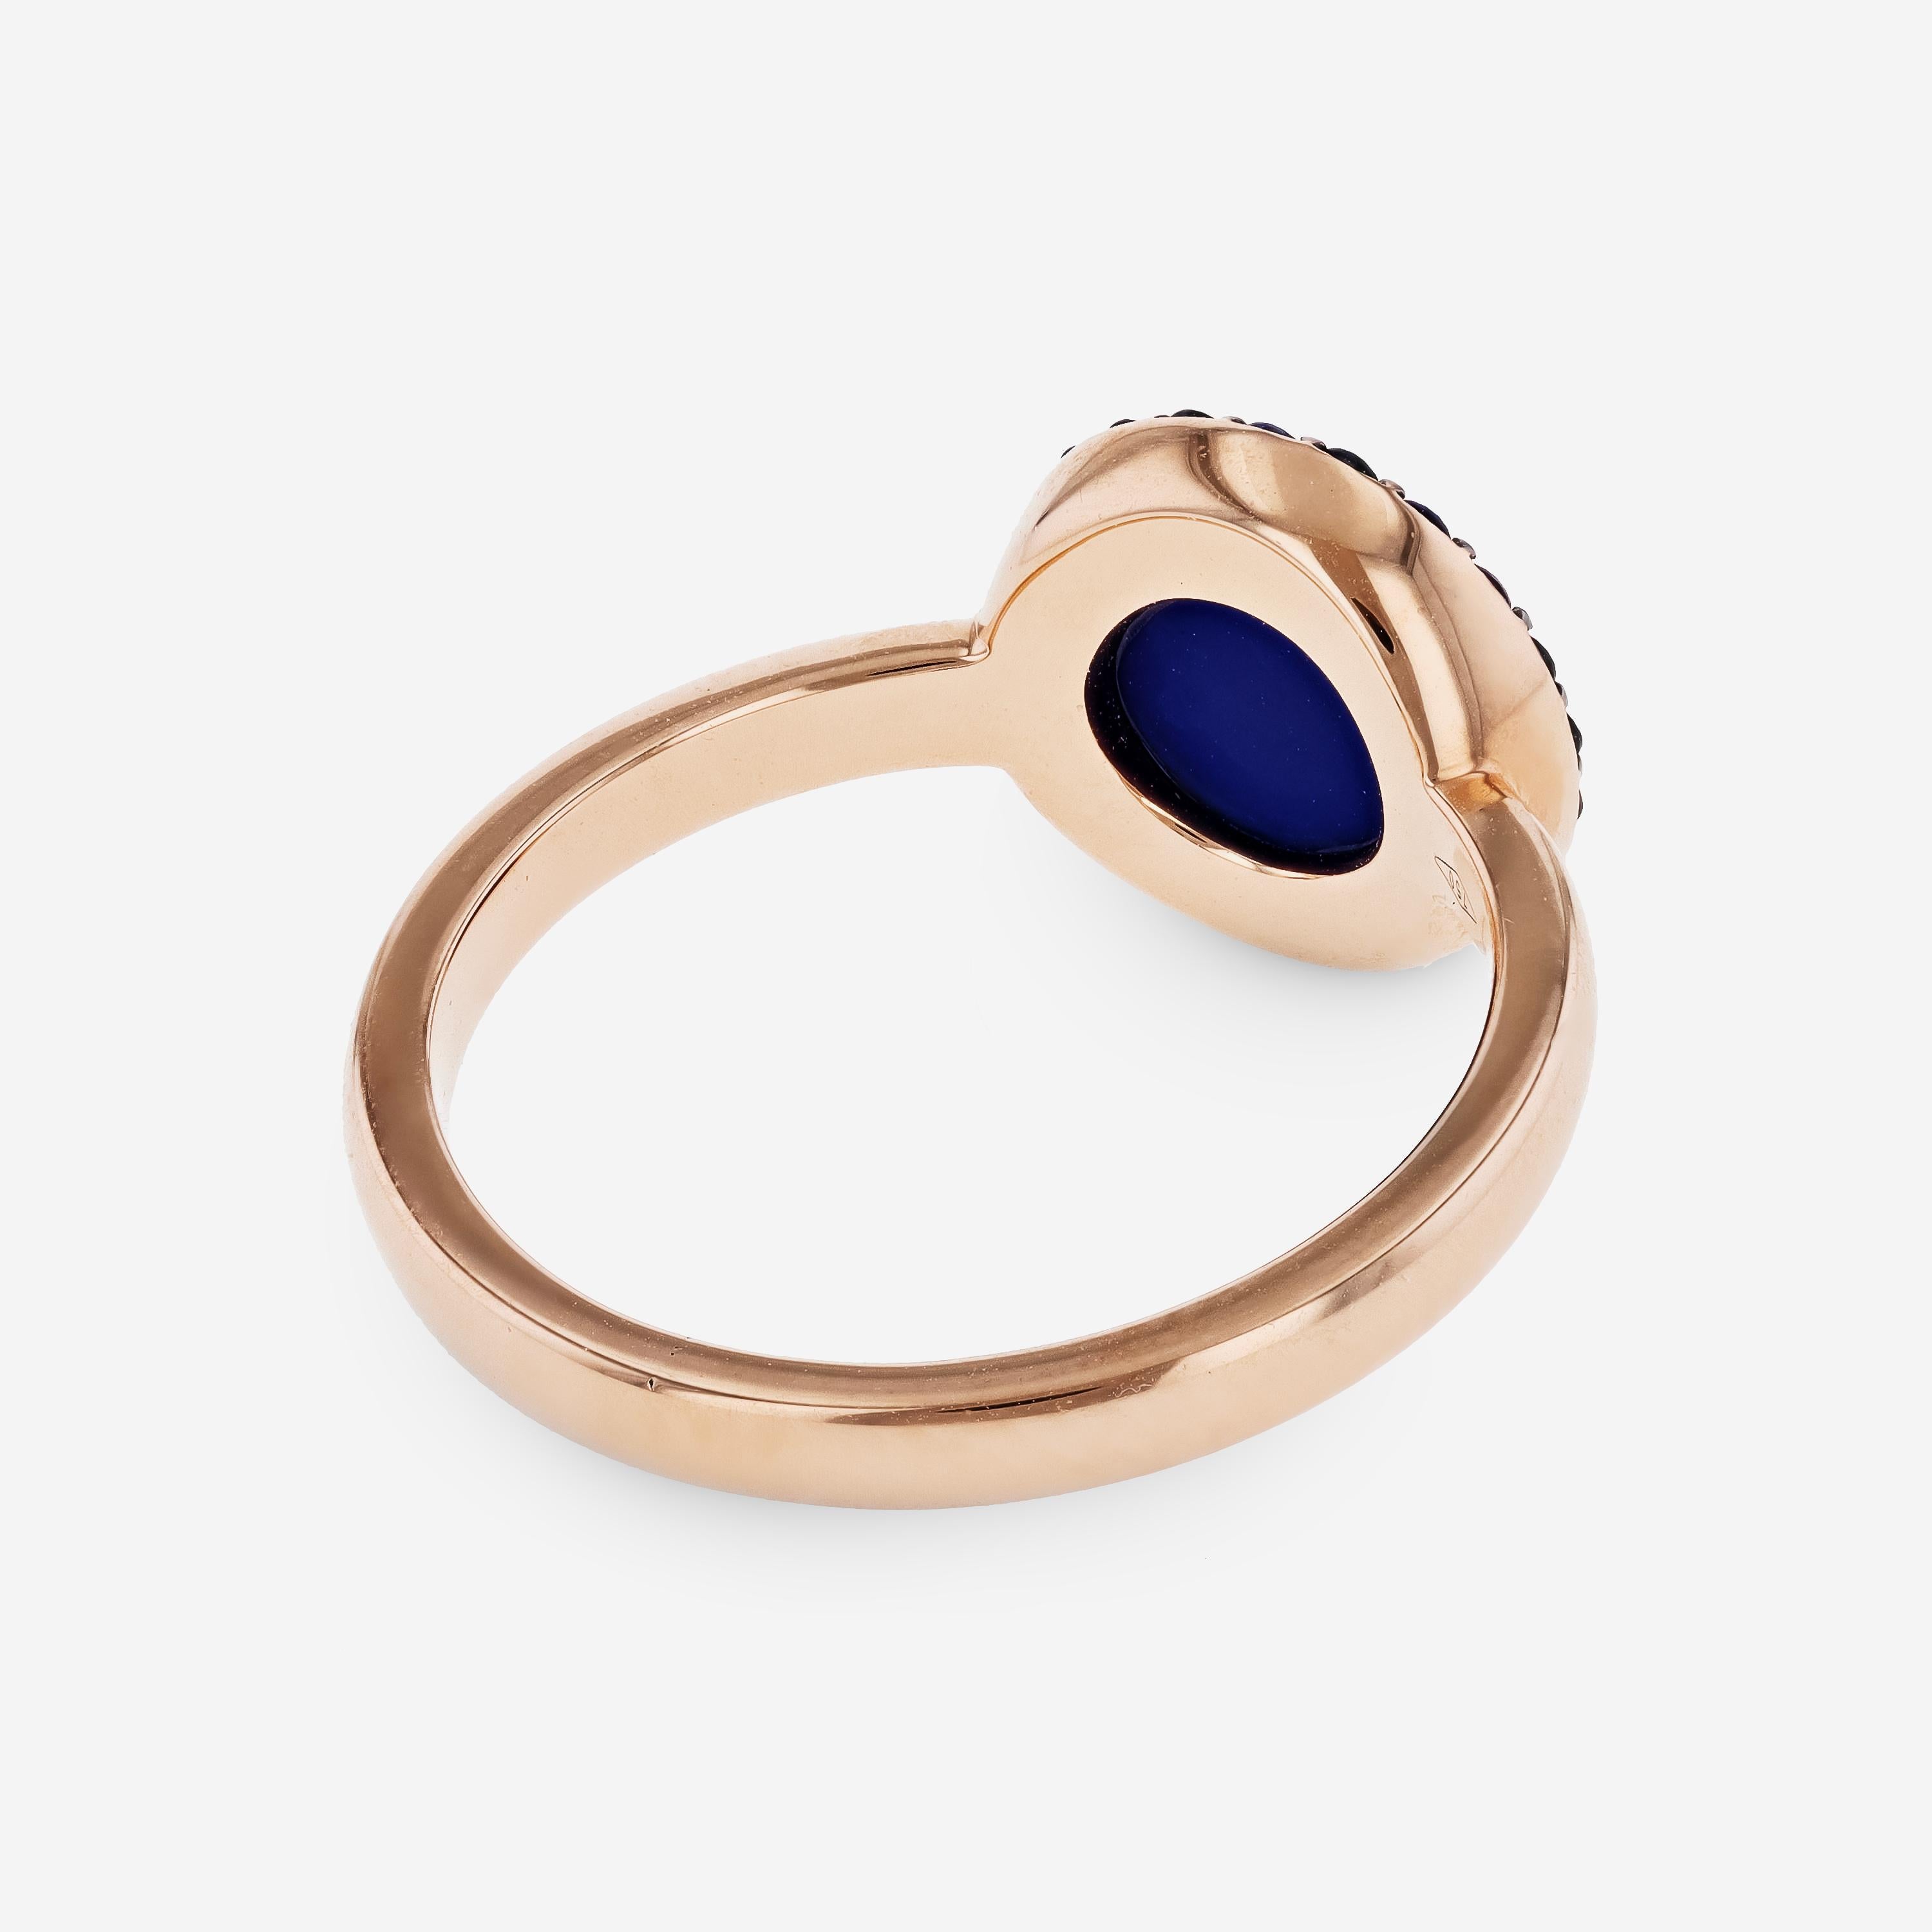 Contemporary Roberto Coin 18K Rose Gold, Agate & Sapphire Statement Ring sz 6.5 For Sale